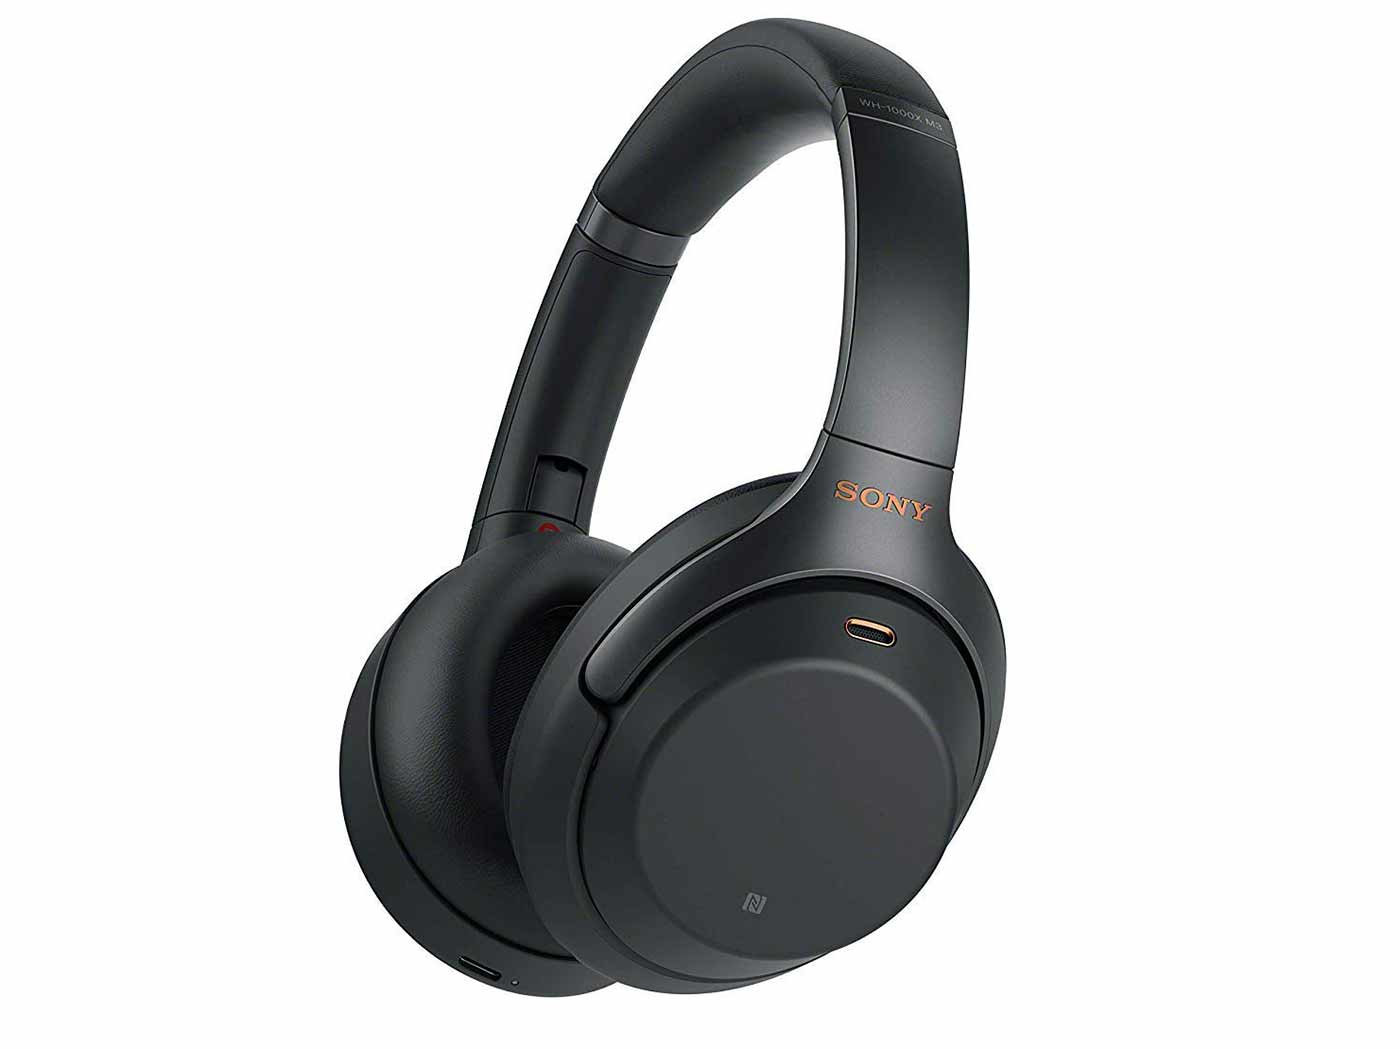 Sony headphones with noise cancelling